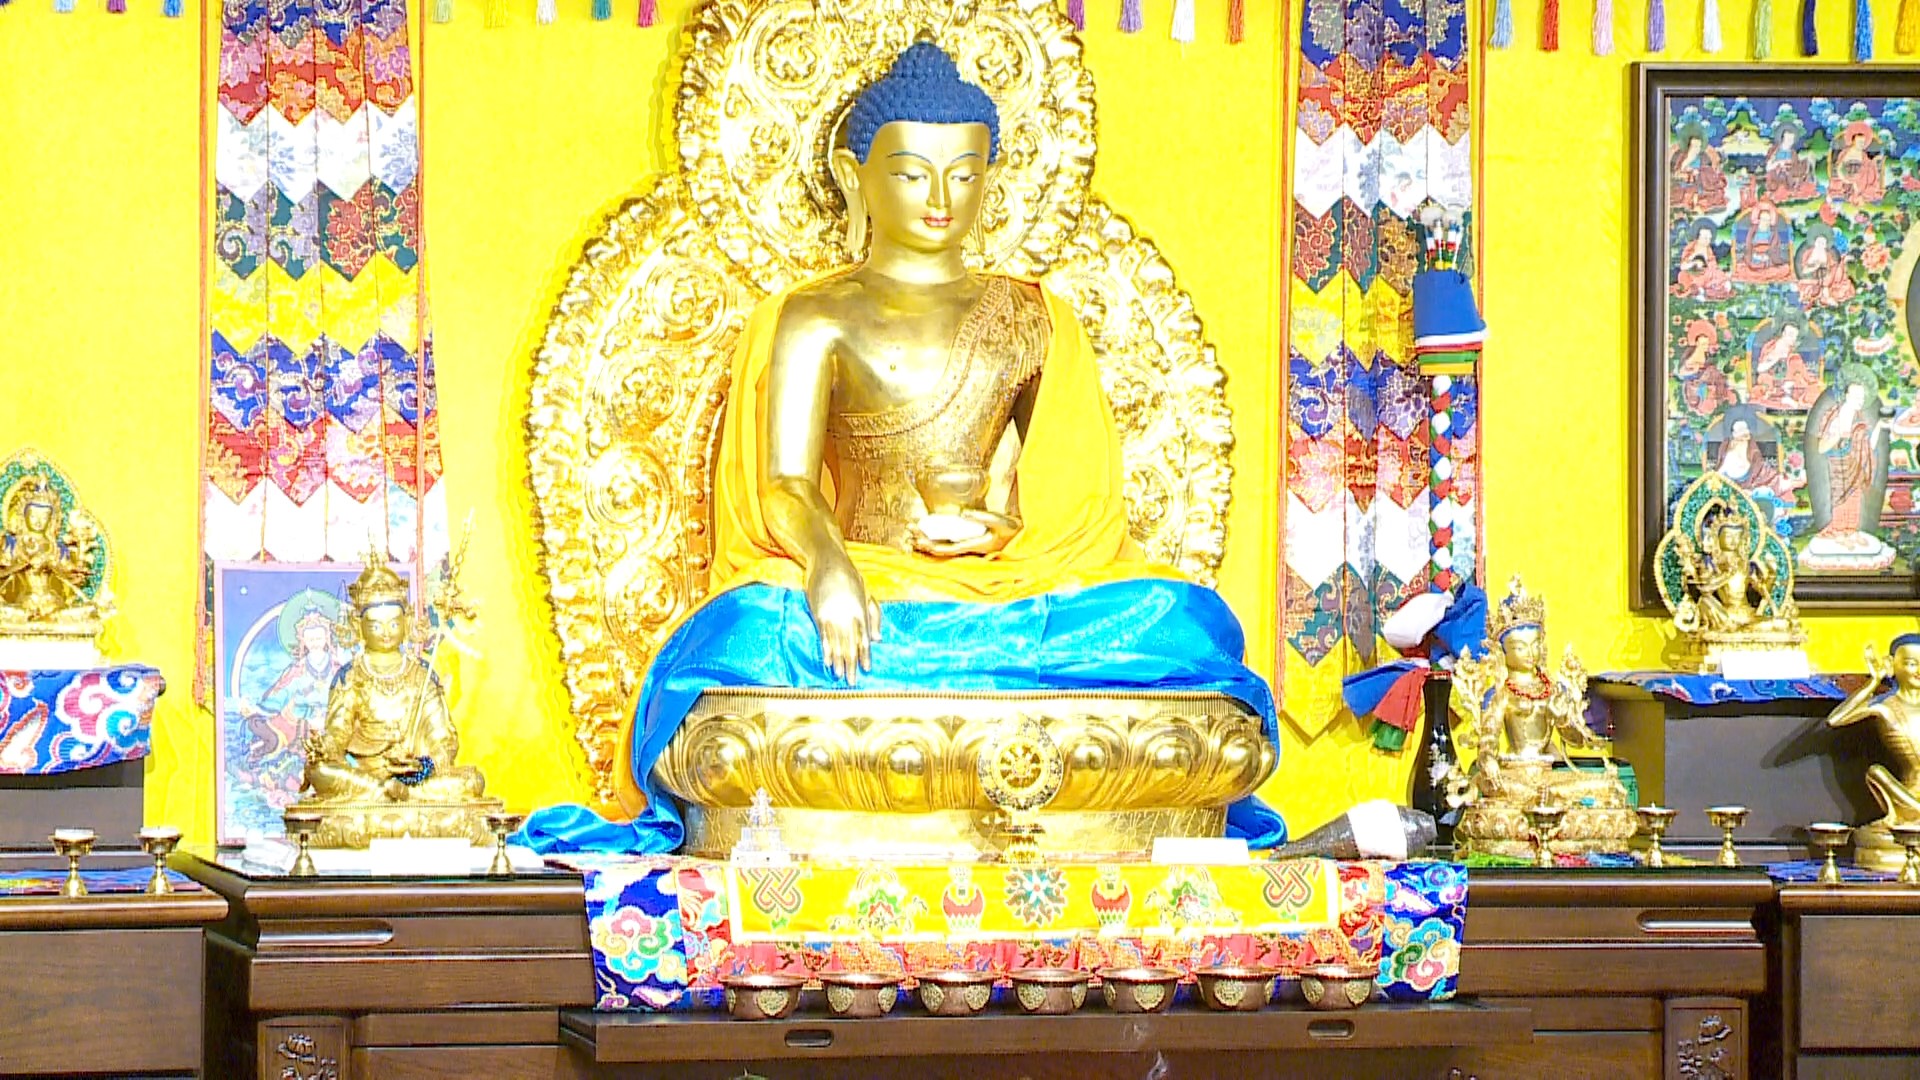 Buddhists celebrate Bodhi Day to commemorate the day Siddhartha Gautama experienced enlightenment.